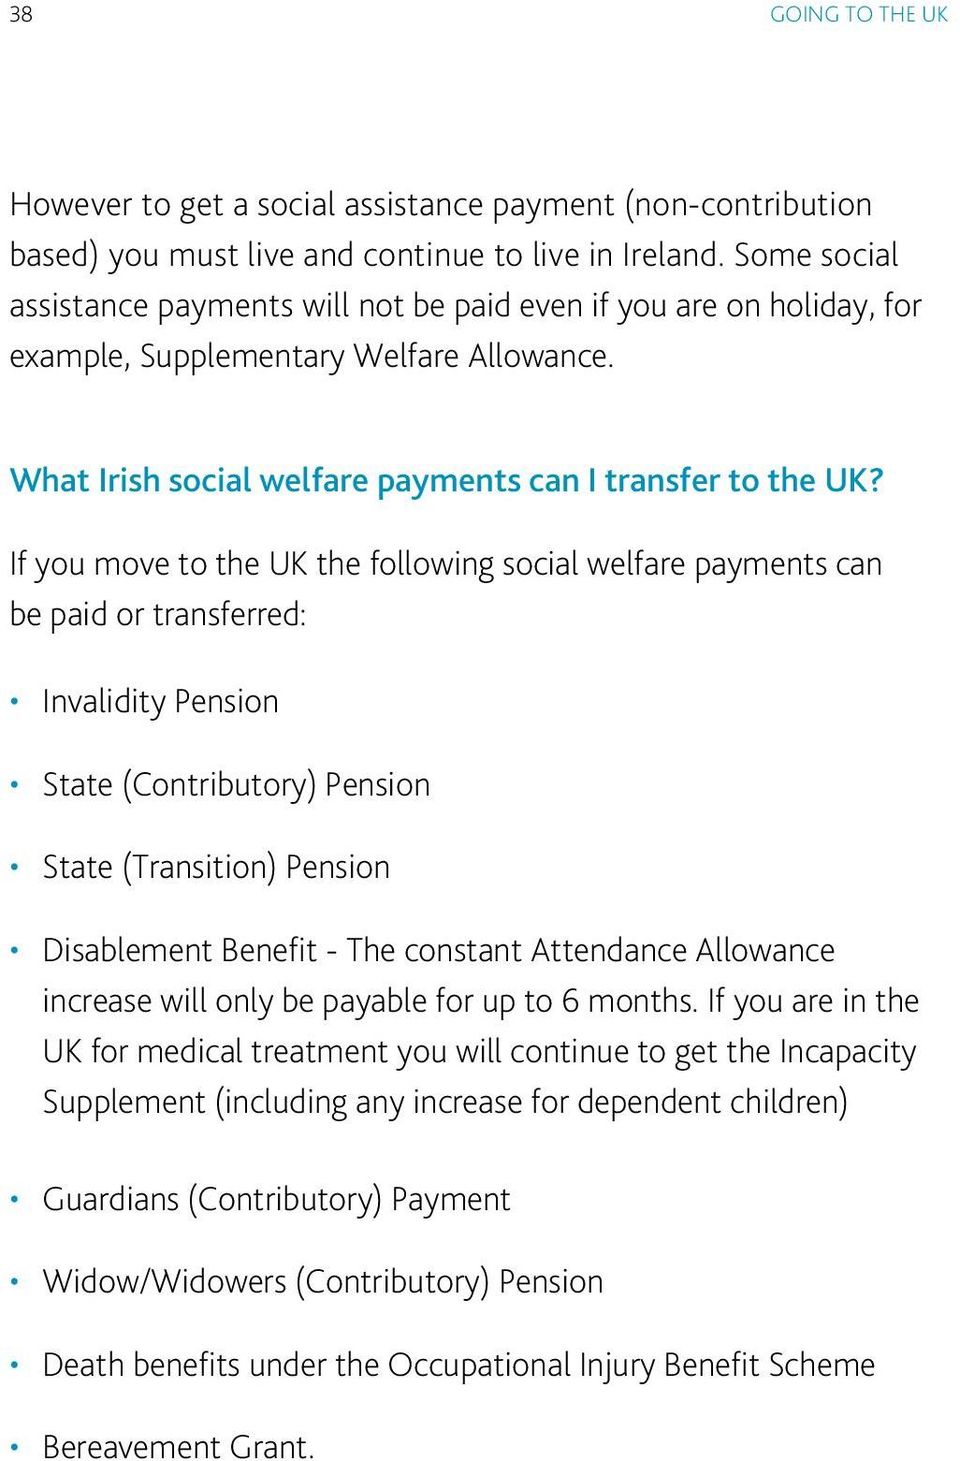 If you move to the UK the following social welfare payments can be paid or transferred: Invalidity Pension State (Contributory) Pension State (Transition) Pension Disablement Benefit - The constant